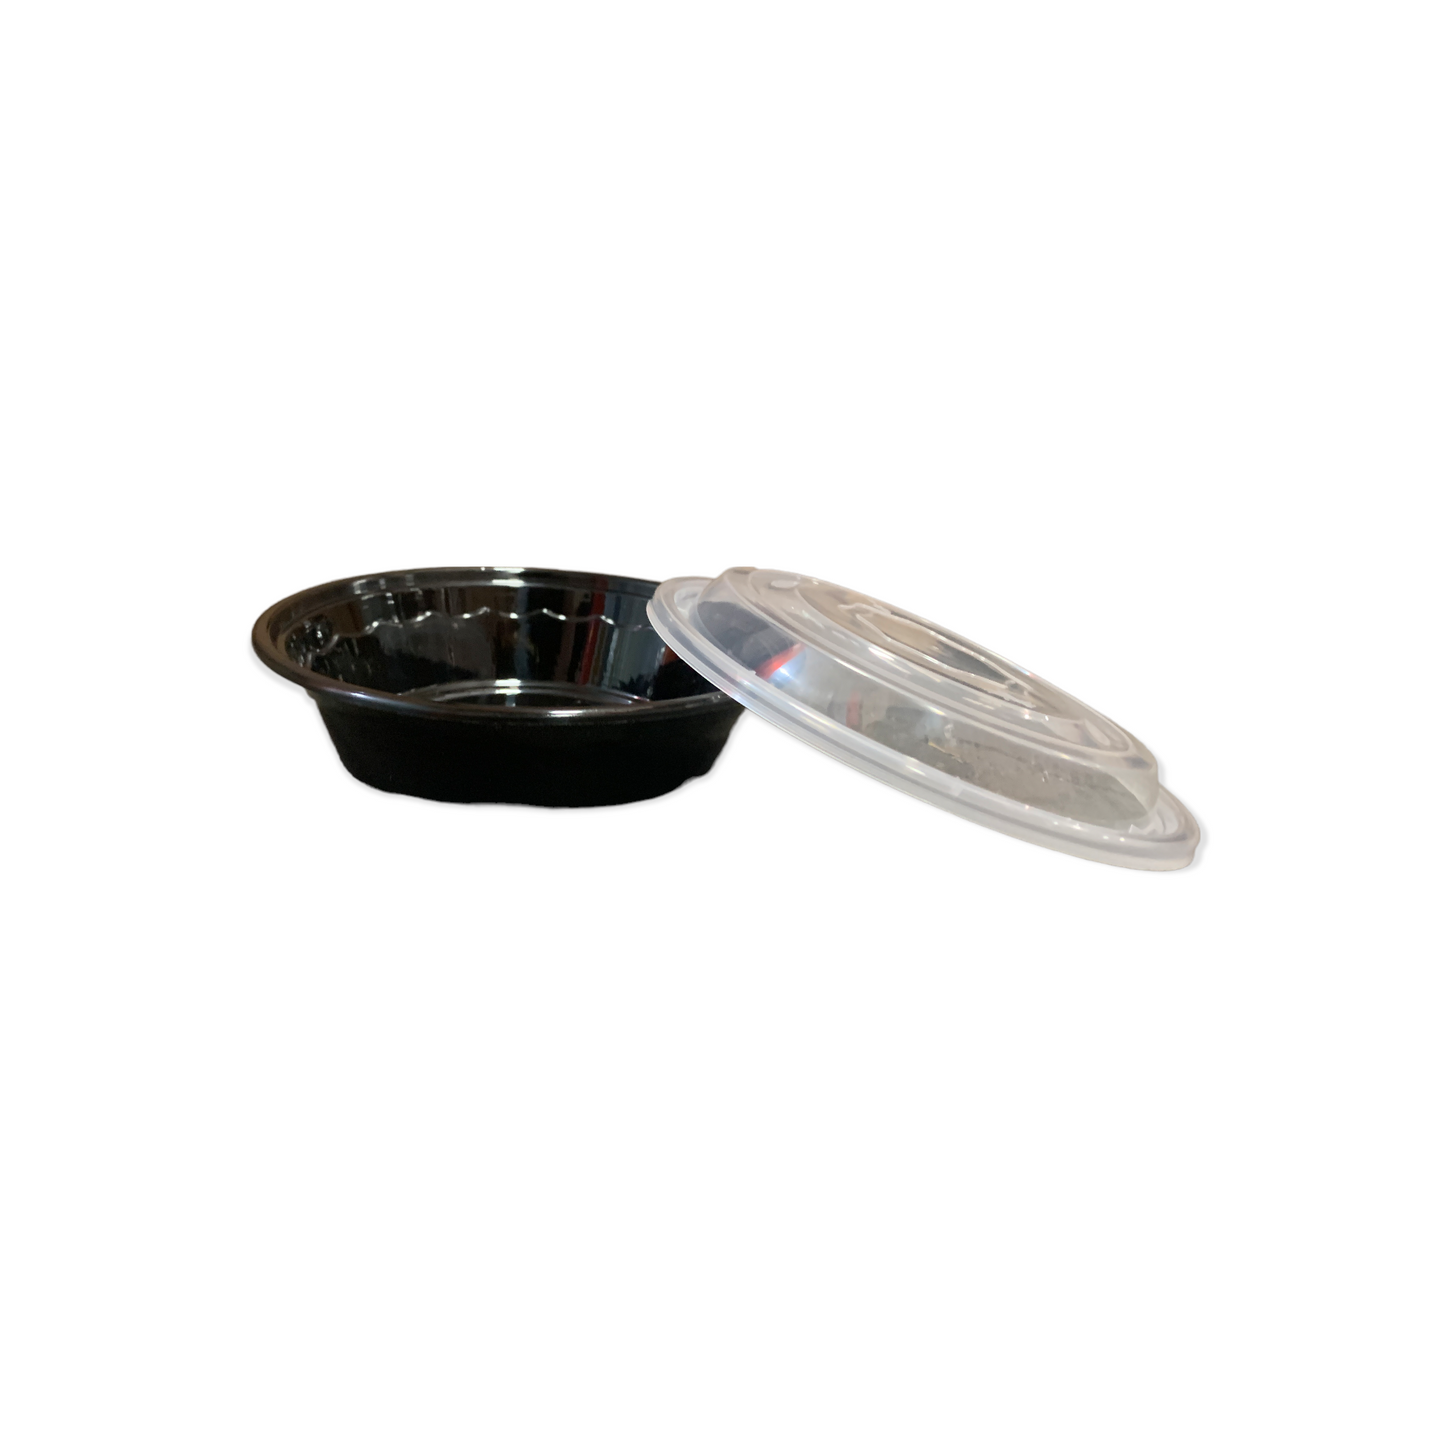 Round Black Containers and Lids-150 Sets